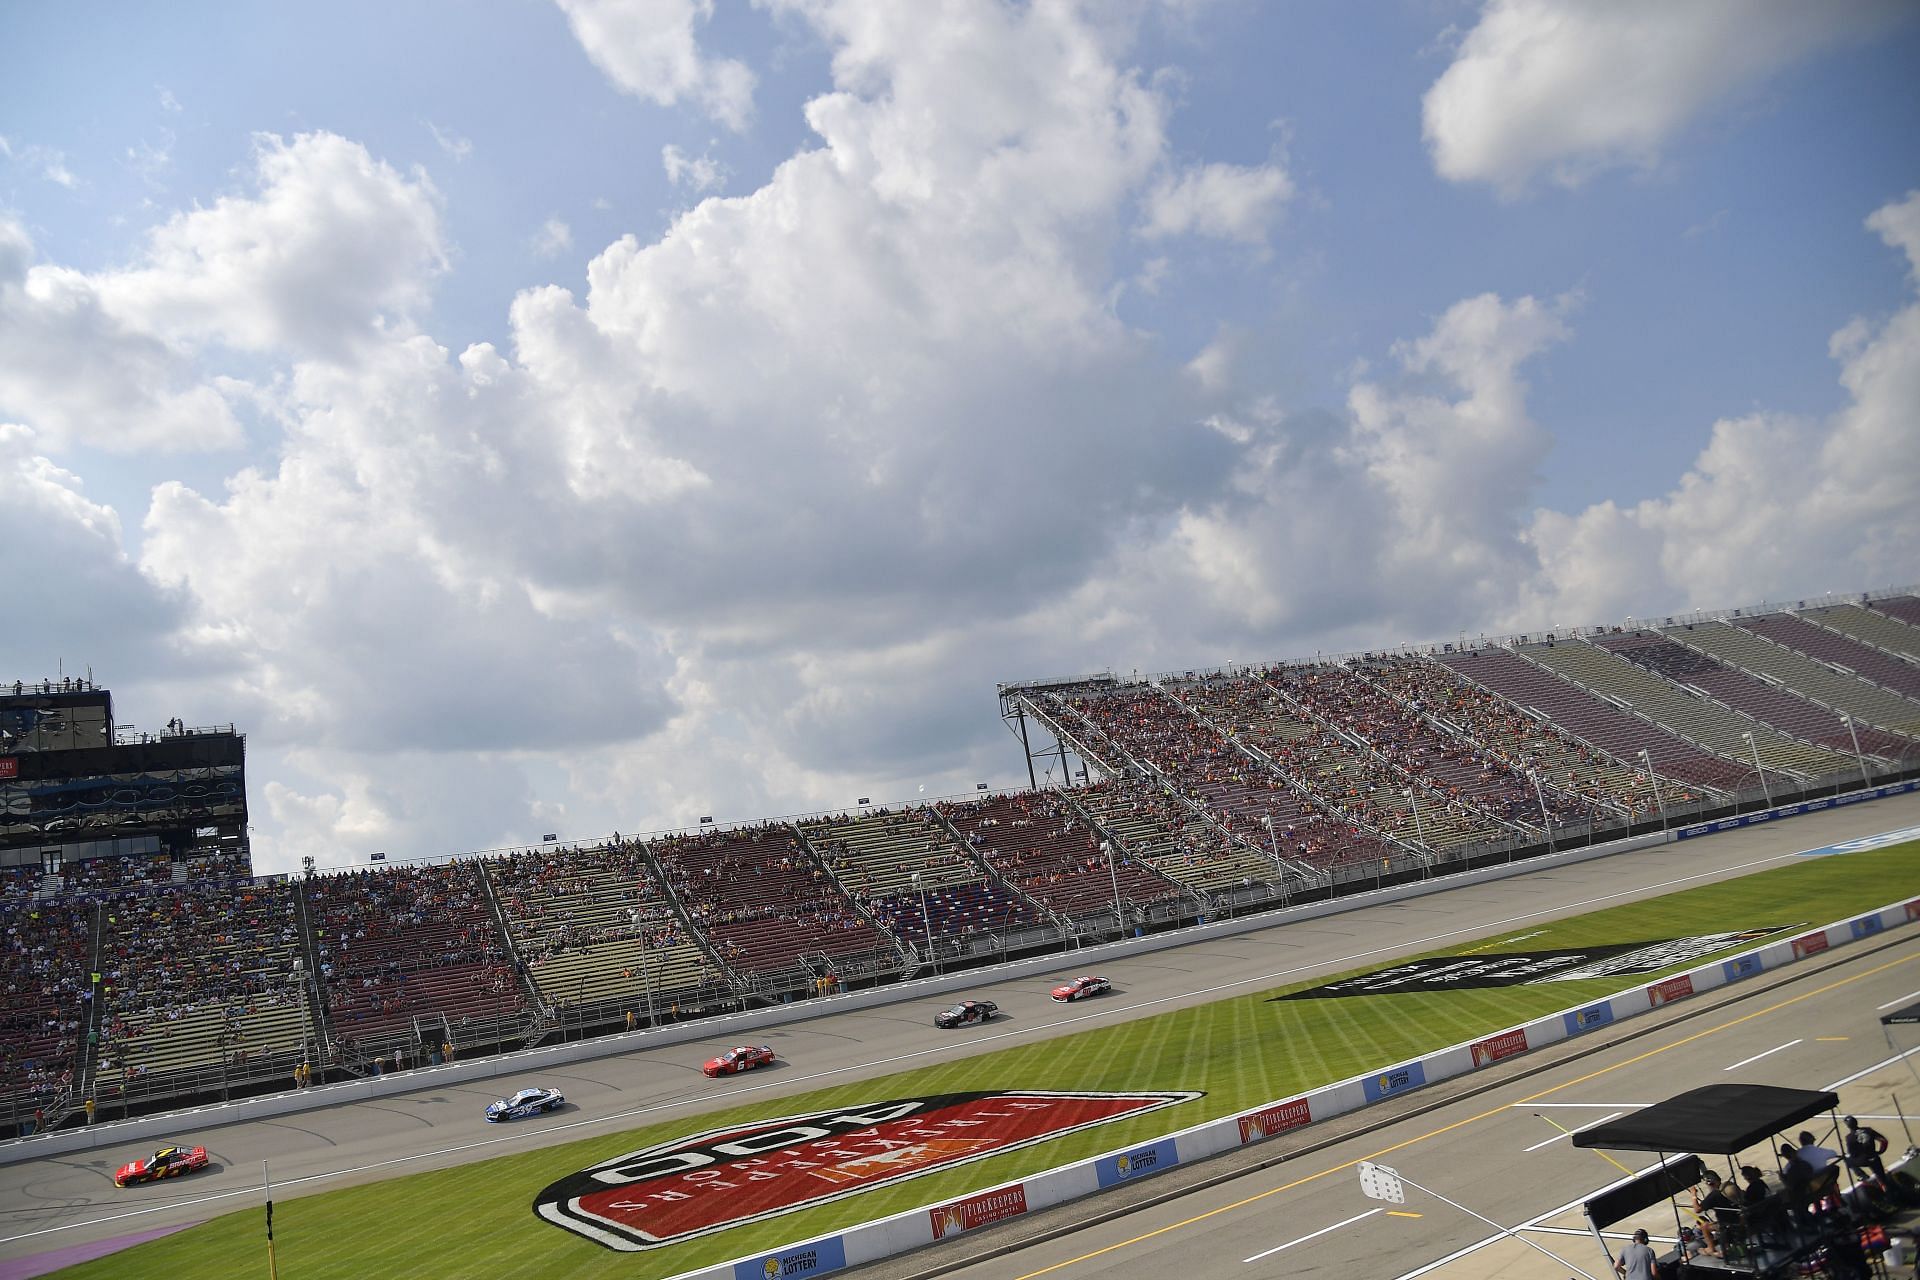 NASCAR 2022 Where to watch FireKeepers Casino 400 at Michigan International Speedway race? Time, TV Schedule and Live Stream